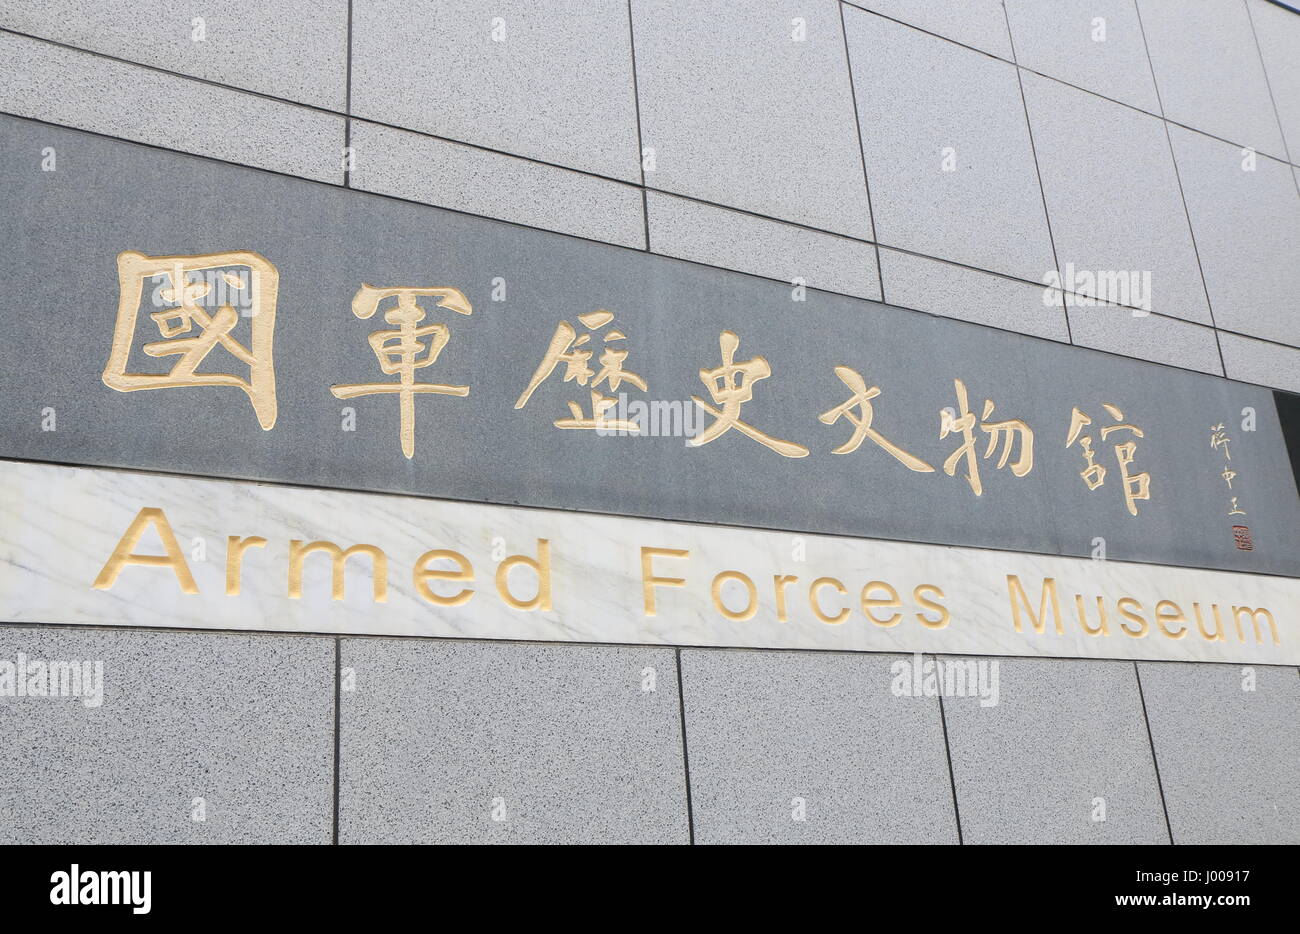 Armed Forces Museum in Taipei Taiwan. Armed Forces Museum show ROC military heritage of different periods. Stock Photo